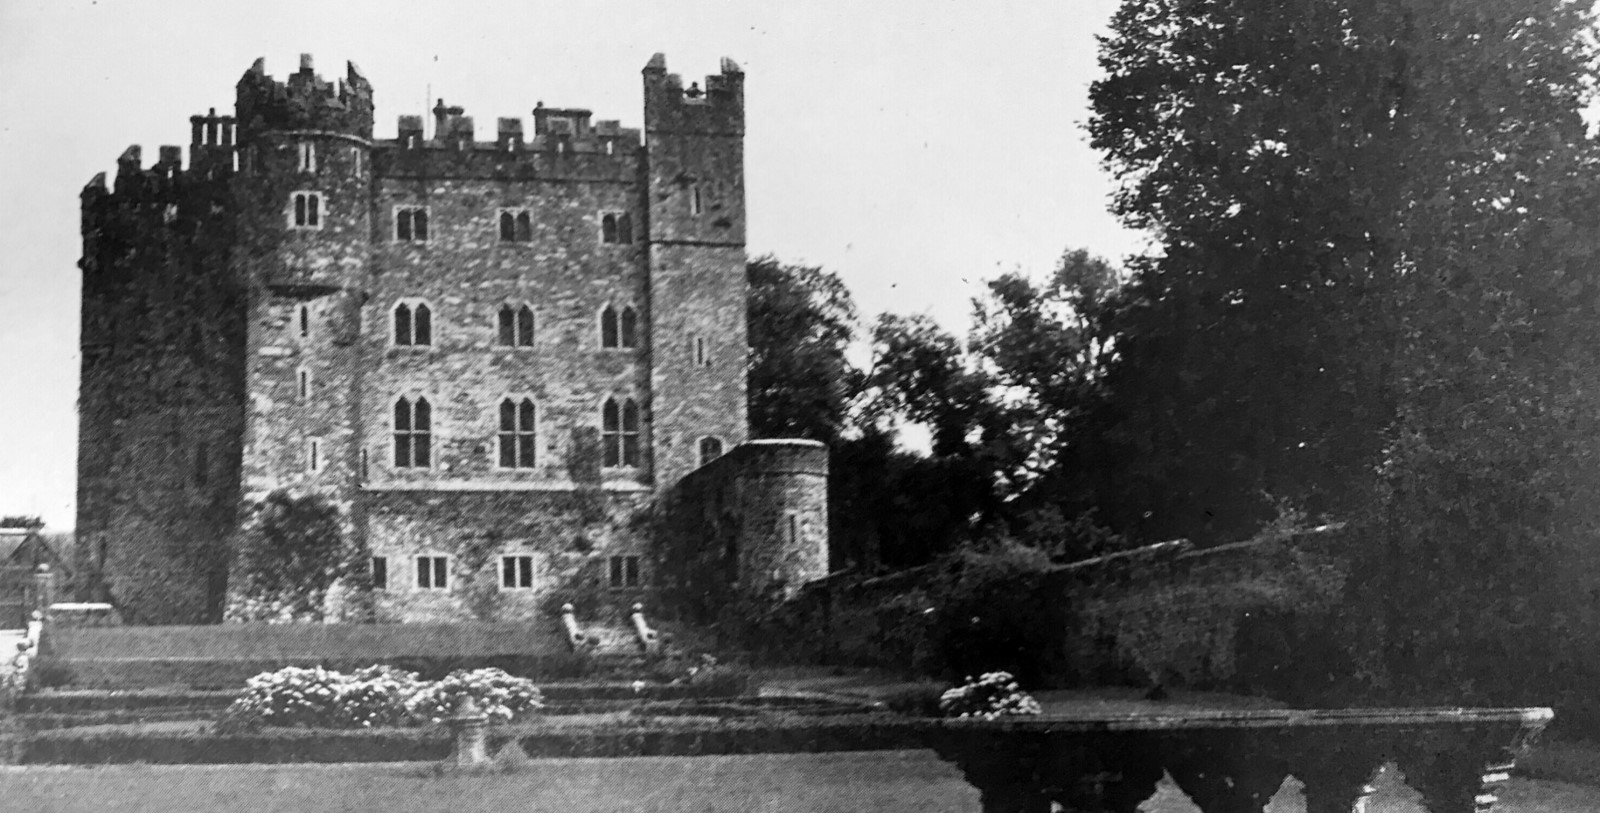 Discover the fascinating family history of the FitzGerald clan at Kilkea Castle.